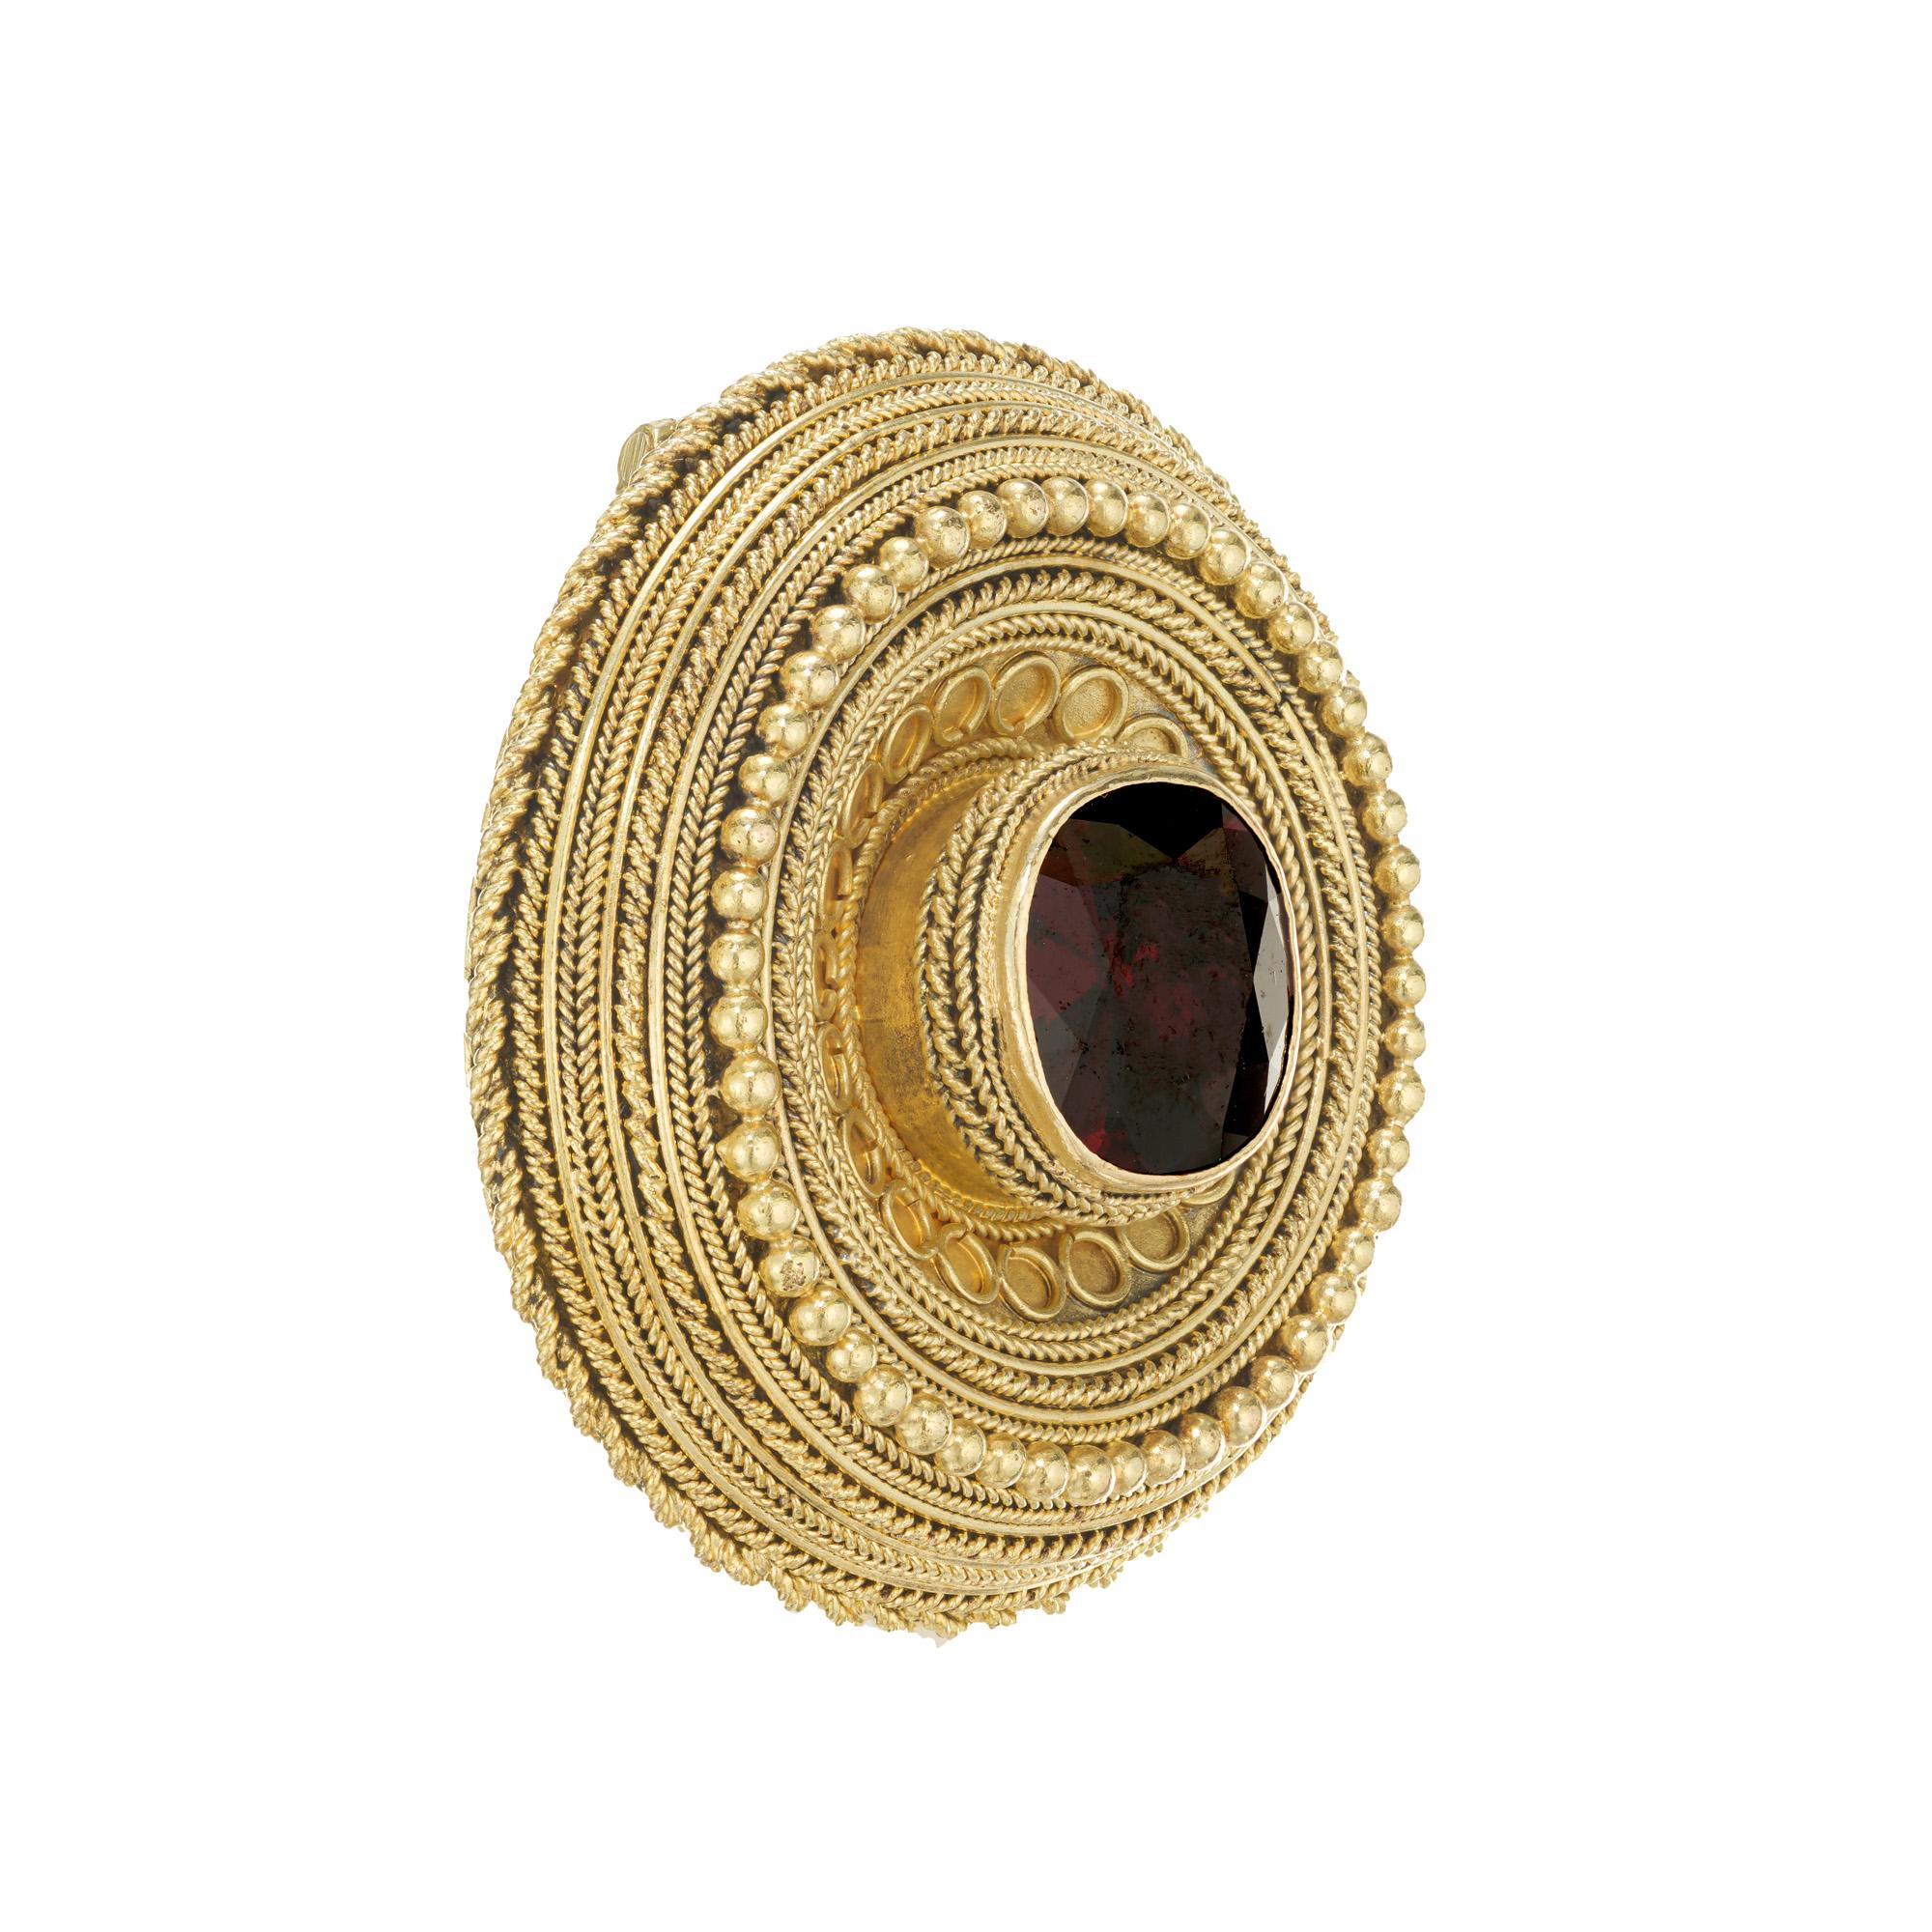 Handmade garnet brooch. One cushion cut deep red, almost brown 2.20cts garnet set in a 14k yellow gold setting. This brooch is a perfect example of the crafting skills in mid to late 19th century, using a different form of twisted wire and band